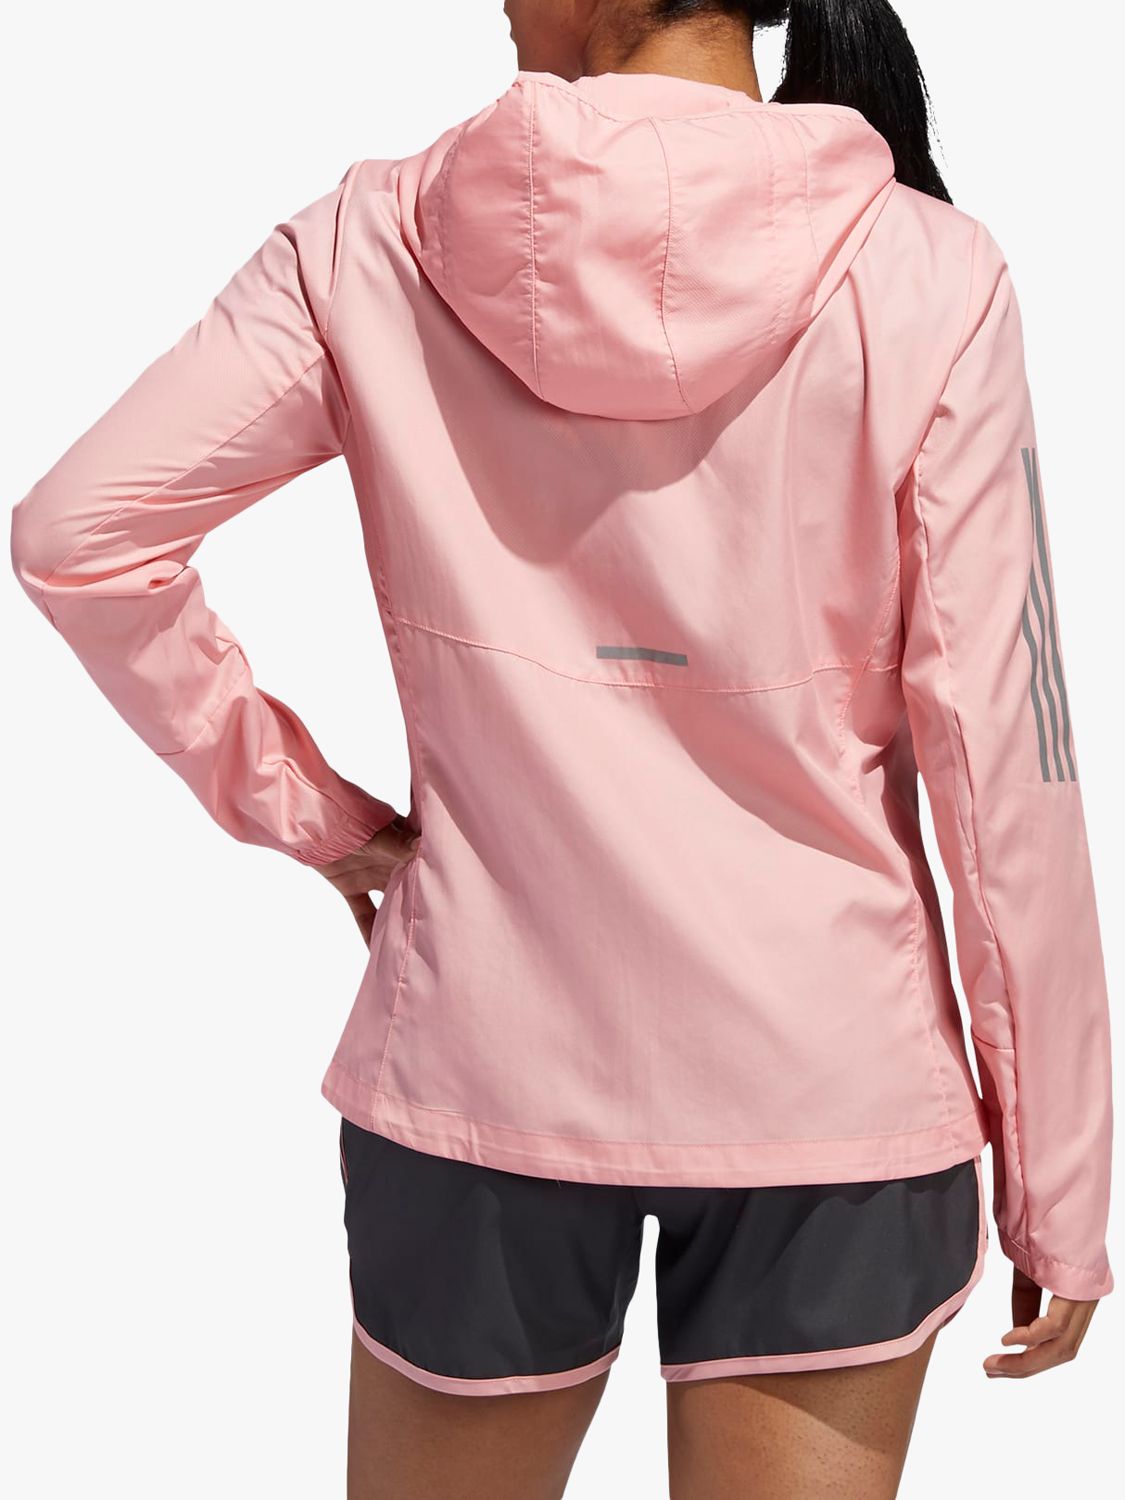 adidas own the run hooded jacket